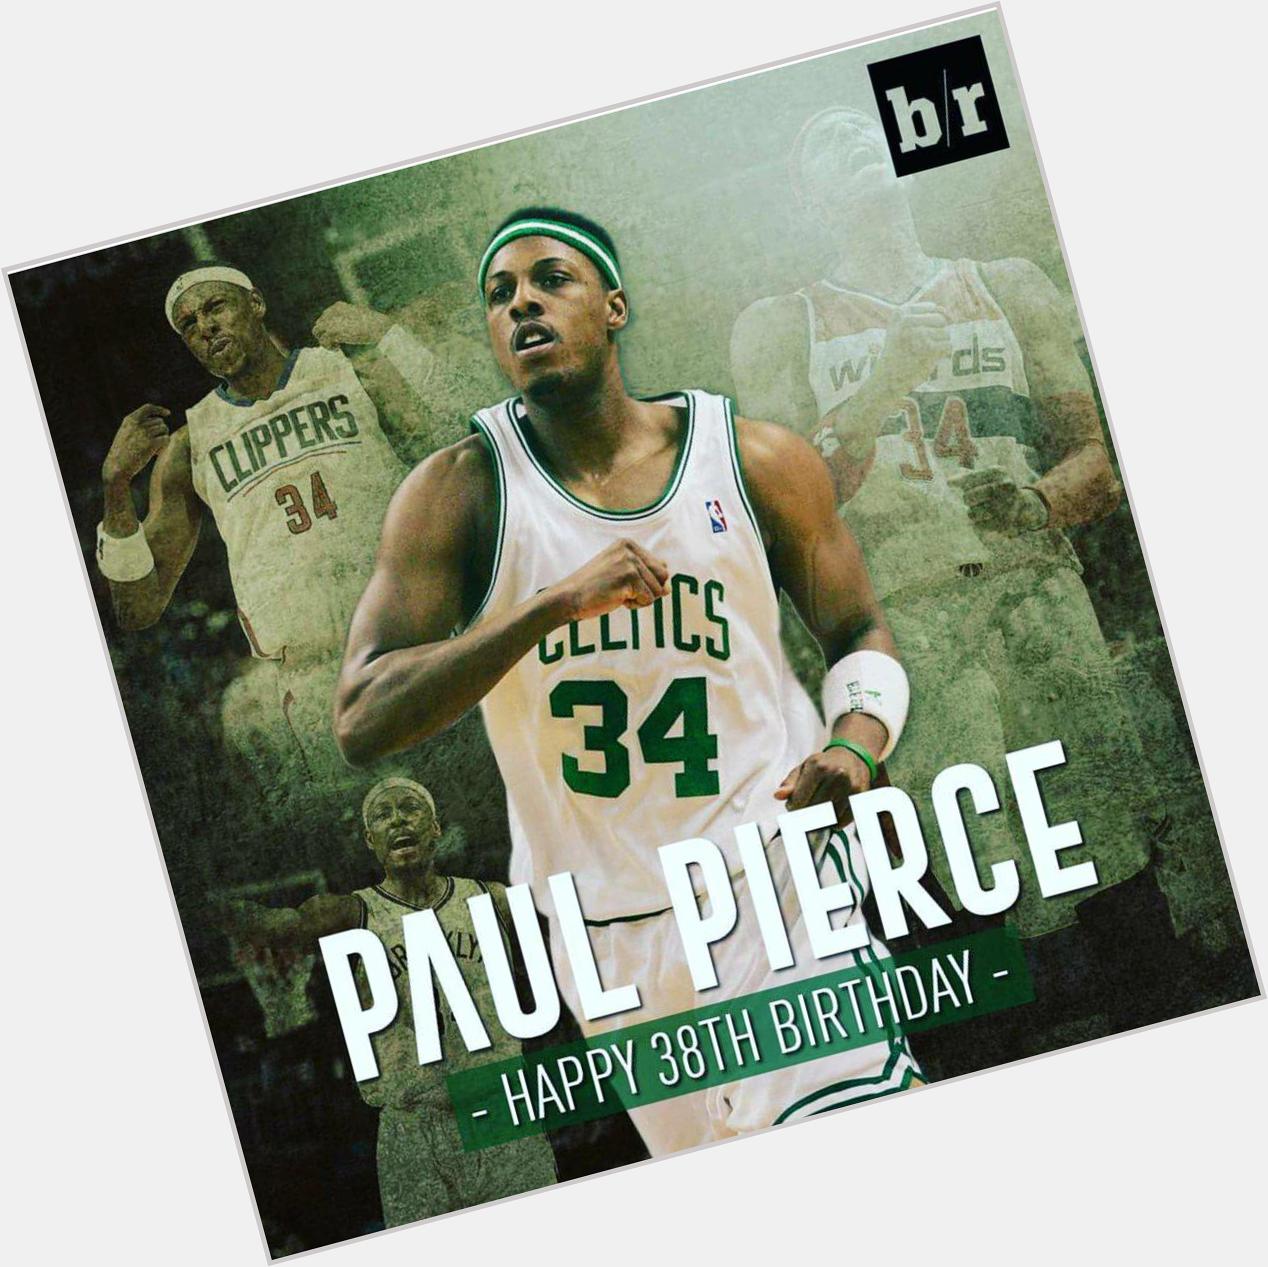 Happy Birthday to the one and only ,  The Captain and The Truth Paul Pierce  

My Childhood Idol  